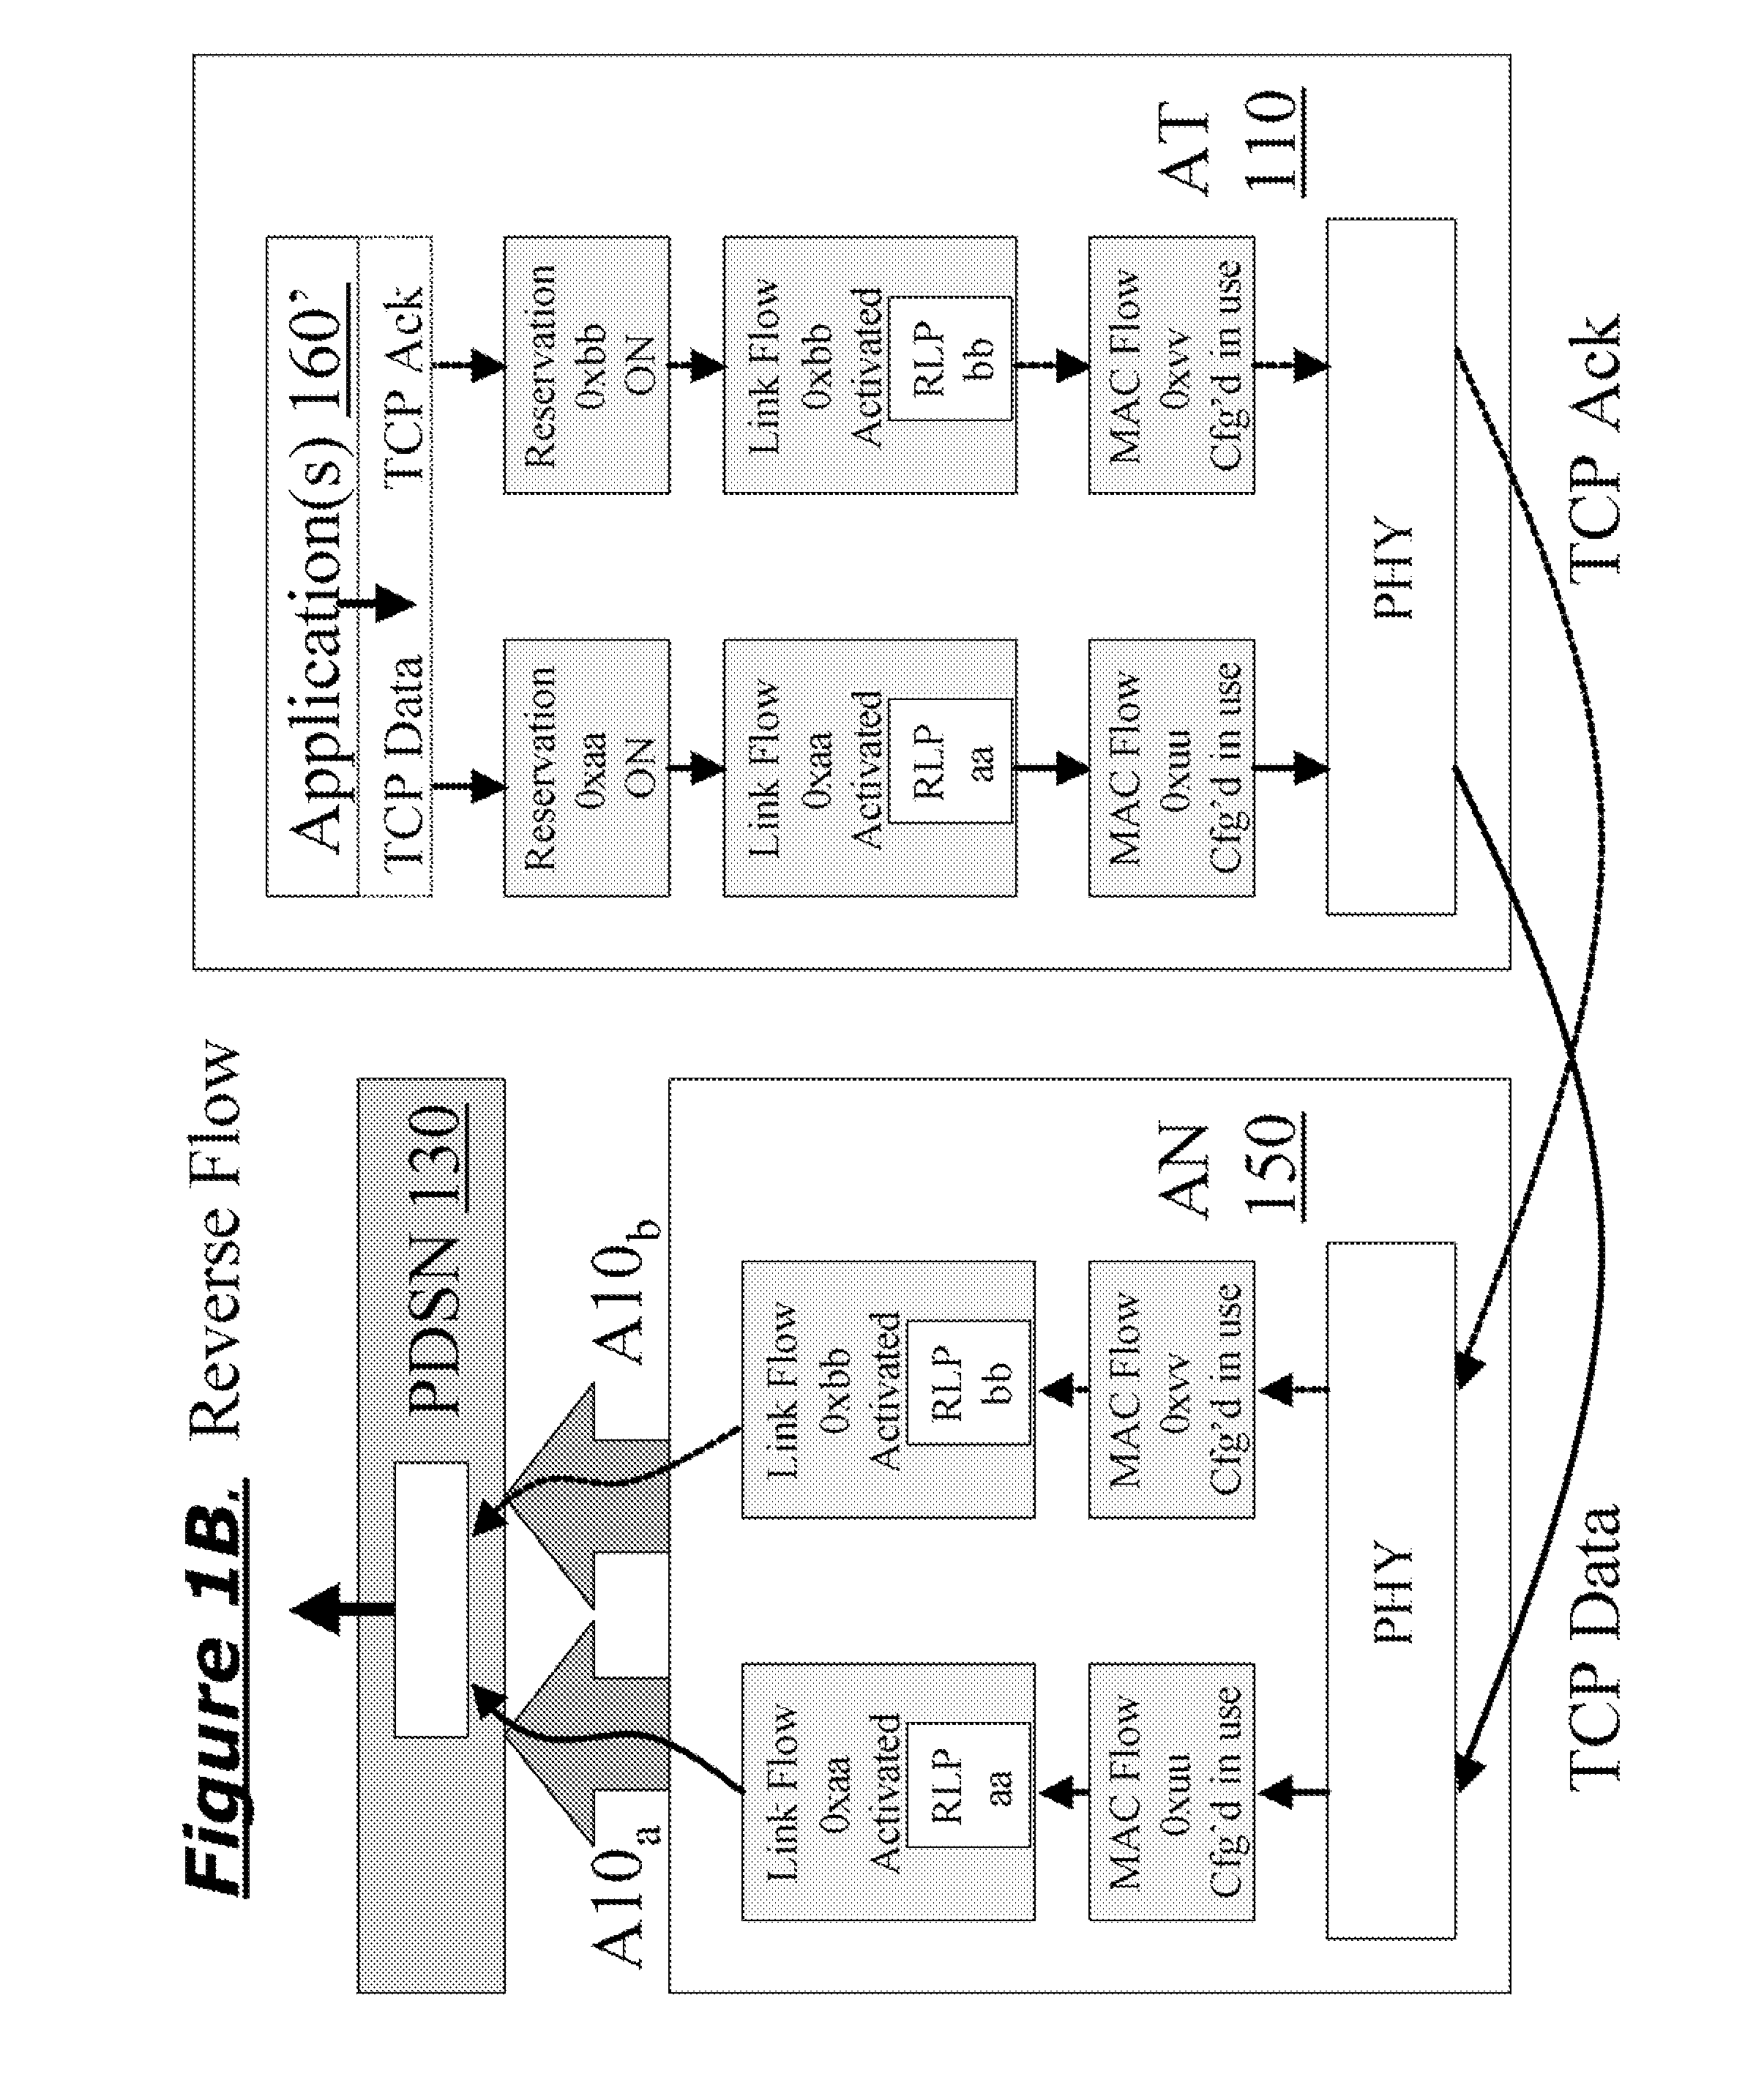 Systems and methods for wireless communications